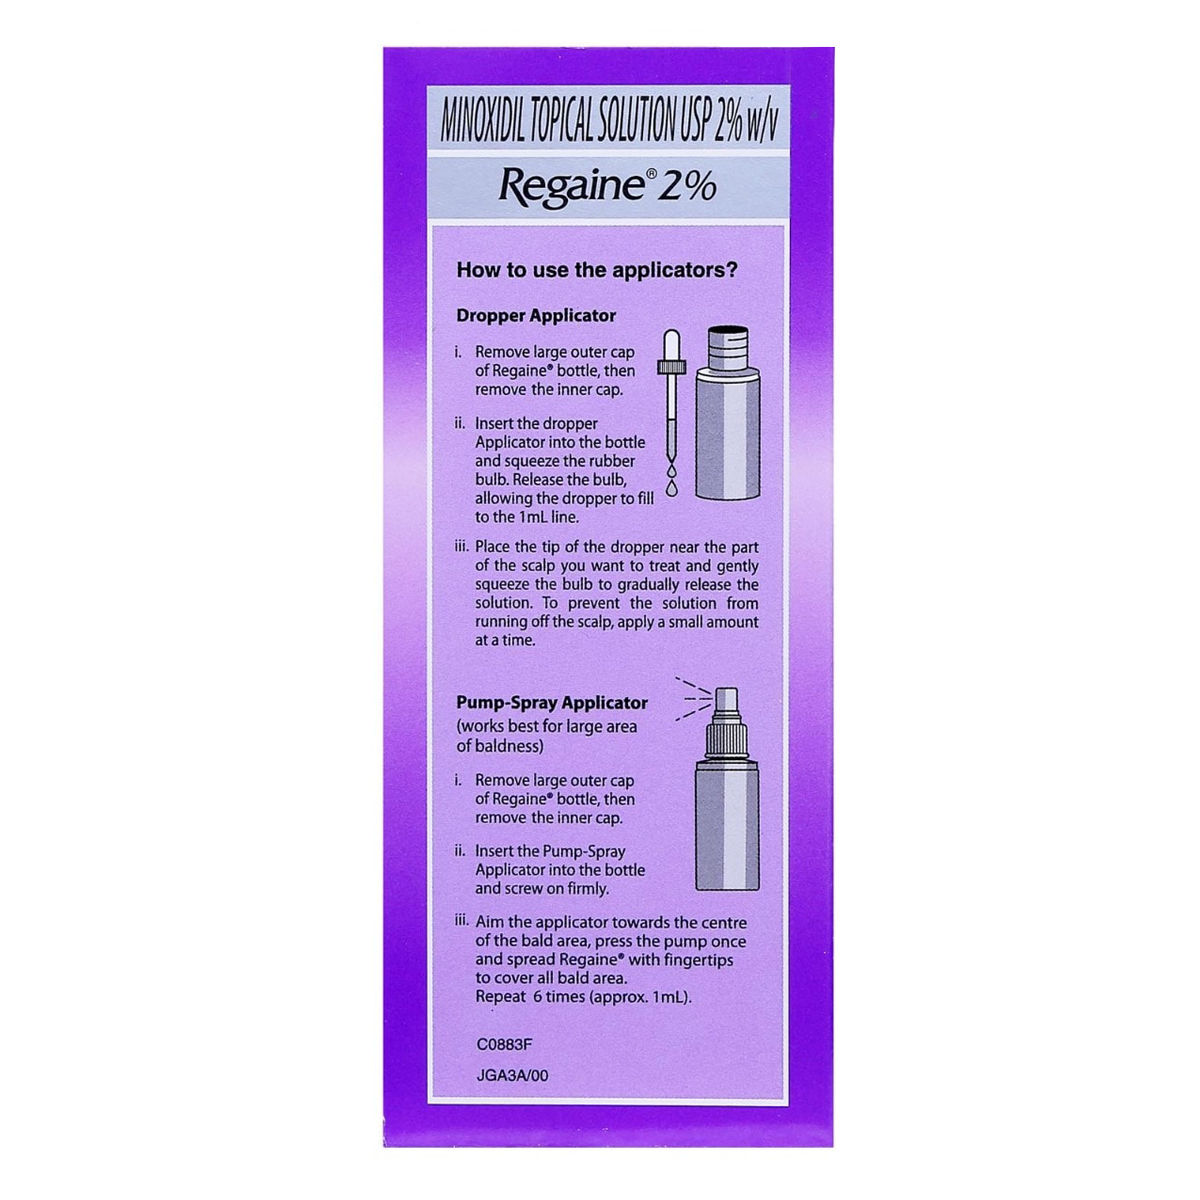 Regaine Solution 60 ml Price, Uses, Side Composition - Apollo Pharmacy